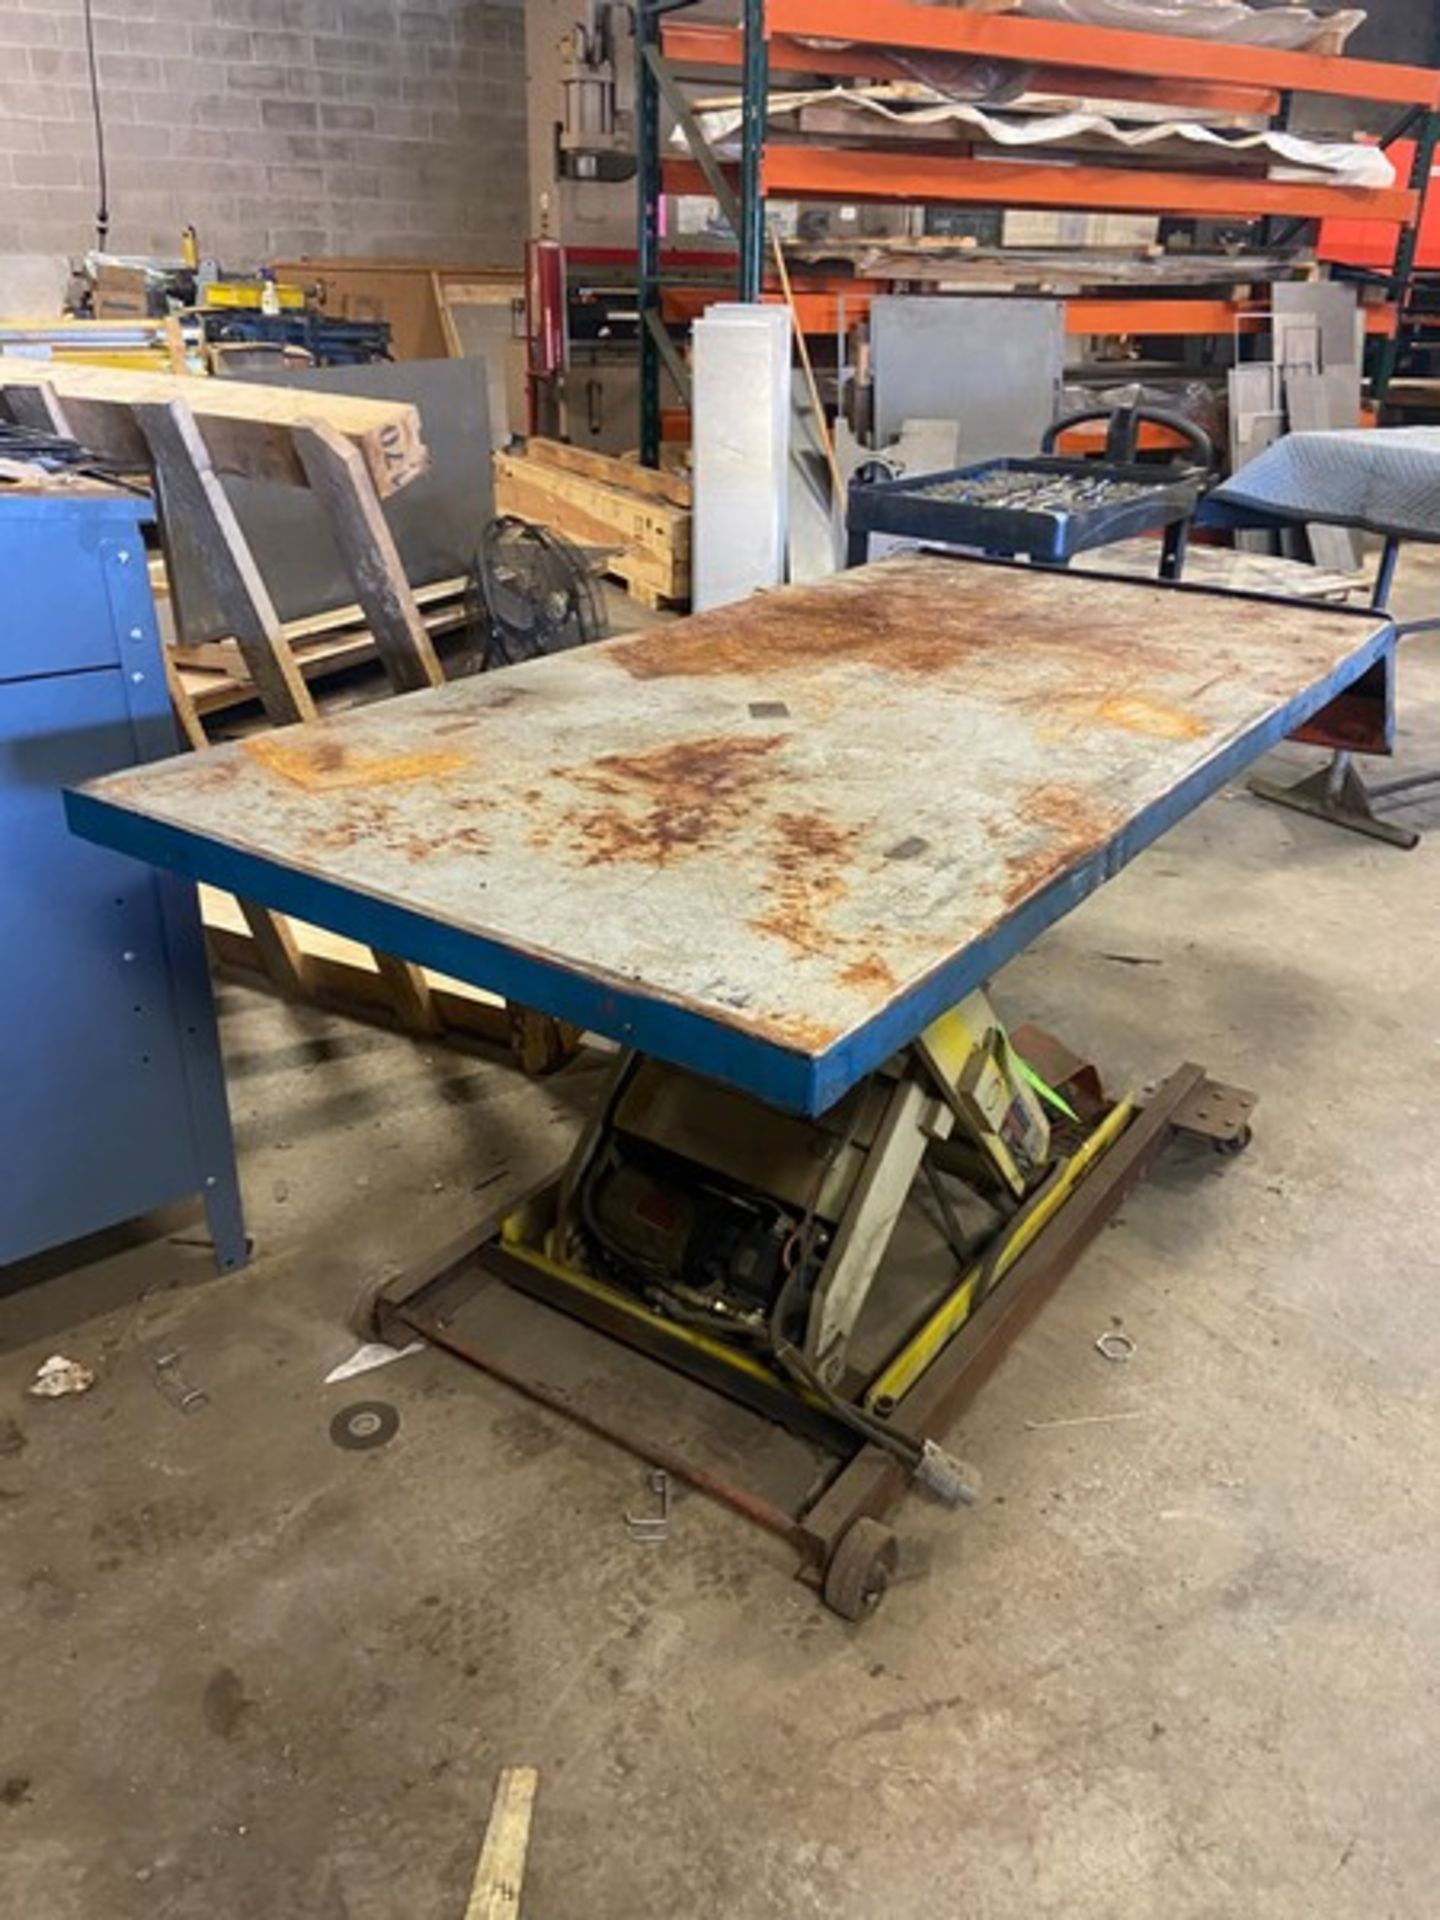 Autoquip Scissor Table, Max. Load 3,000 lbs., M/N 24S25, Table Top Dims.: Aprox. 72” L x 36” W - Image 6 of 6